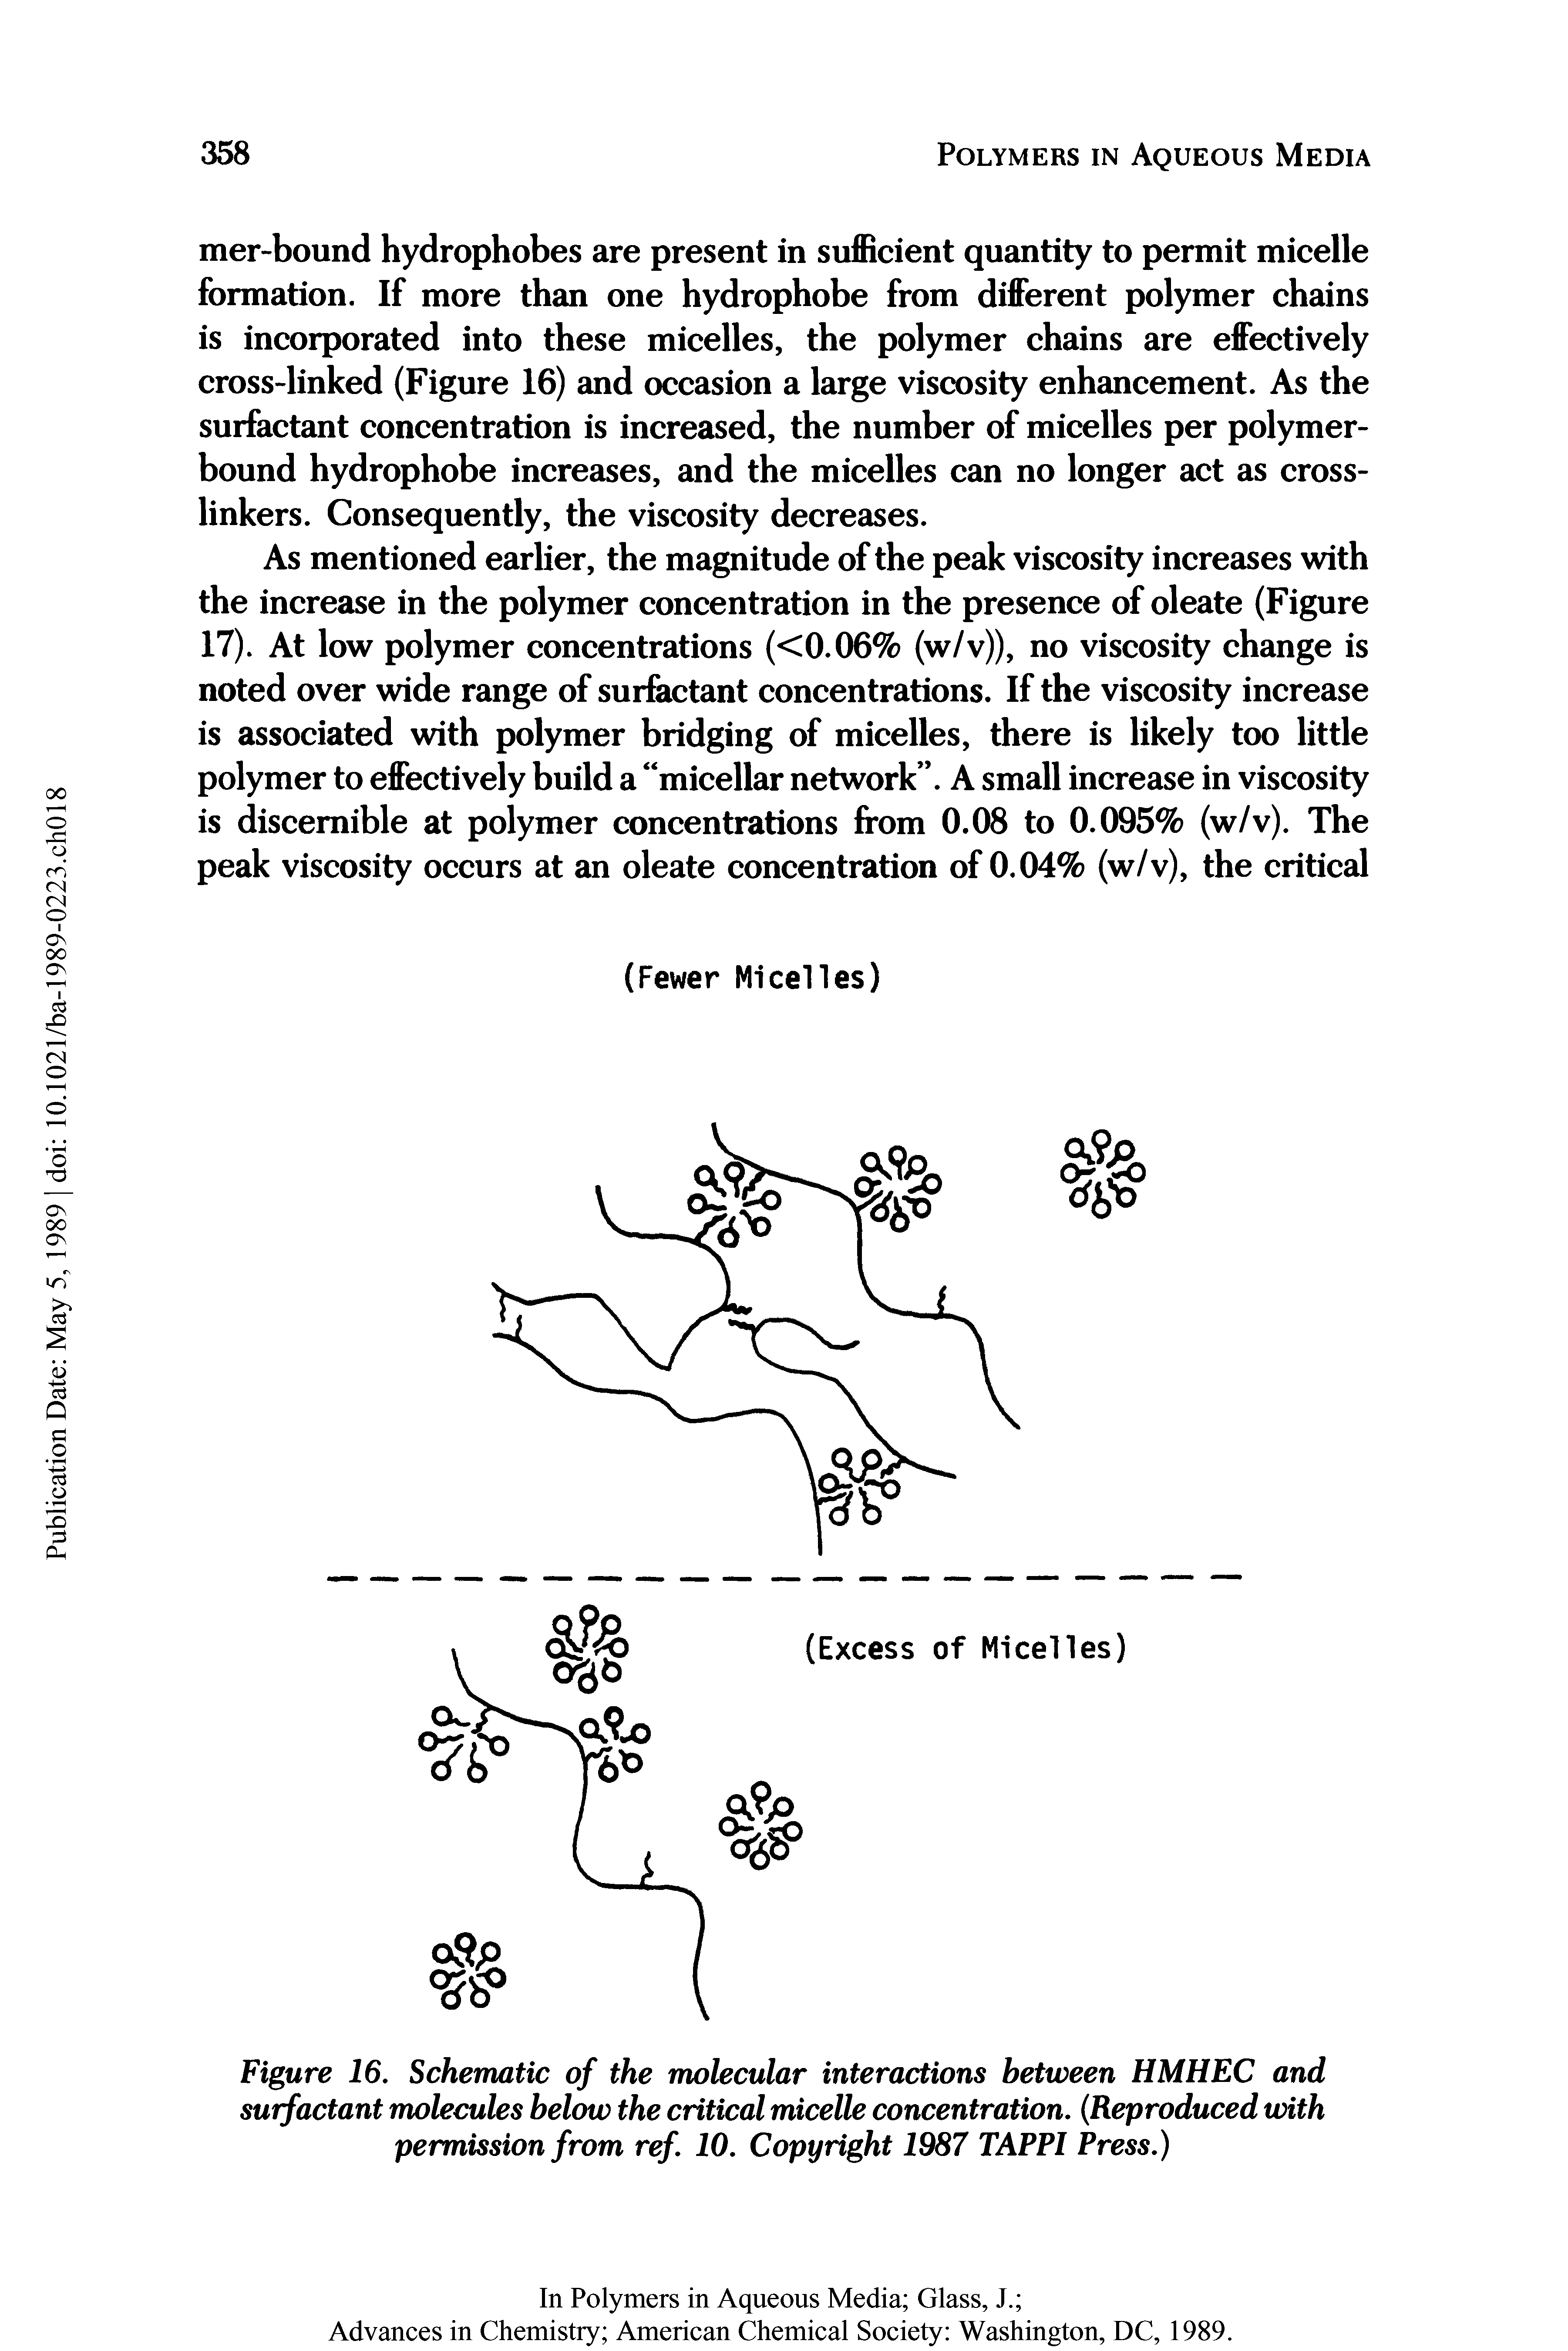 Figure 16. Schematic of the molecular interactions between HMHEC and surfactant molecules below the critical micelle concentration. Reproduced with permission from ref. 10. Copyright 1987 TAPPI Press.)...